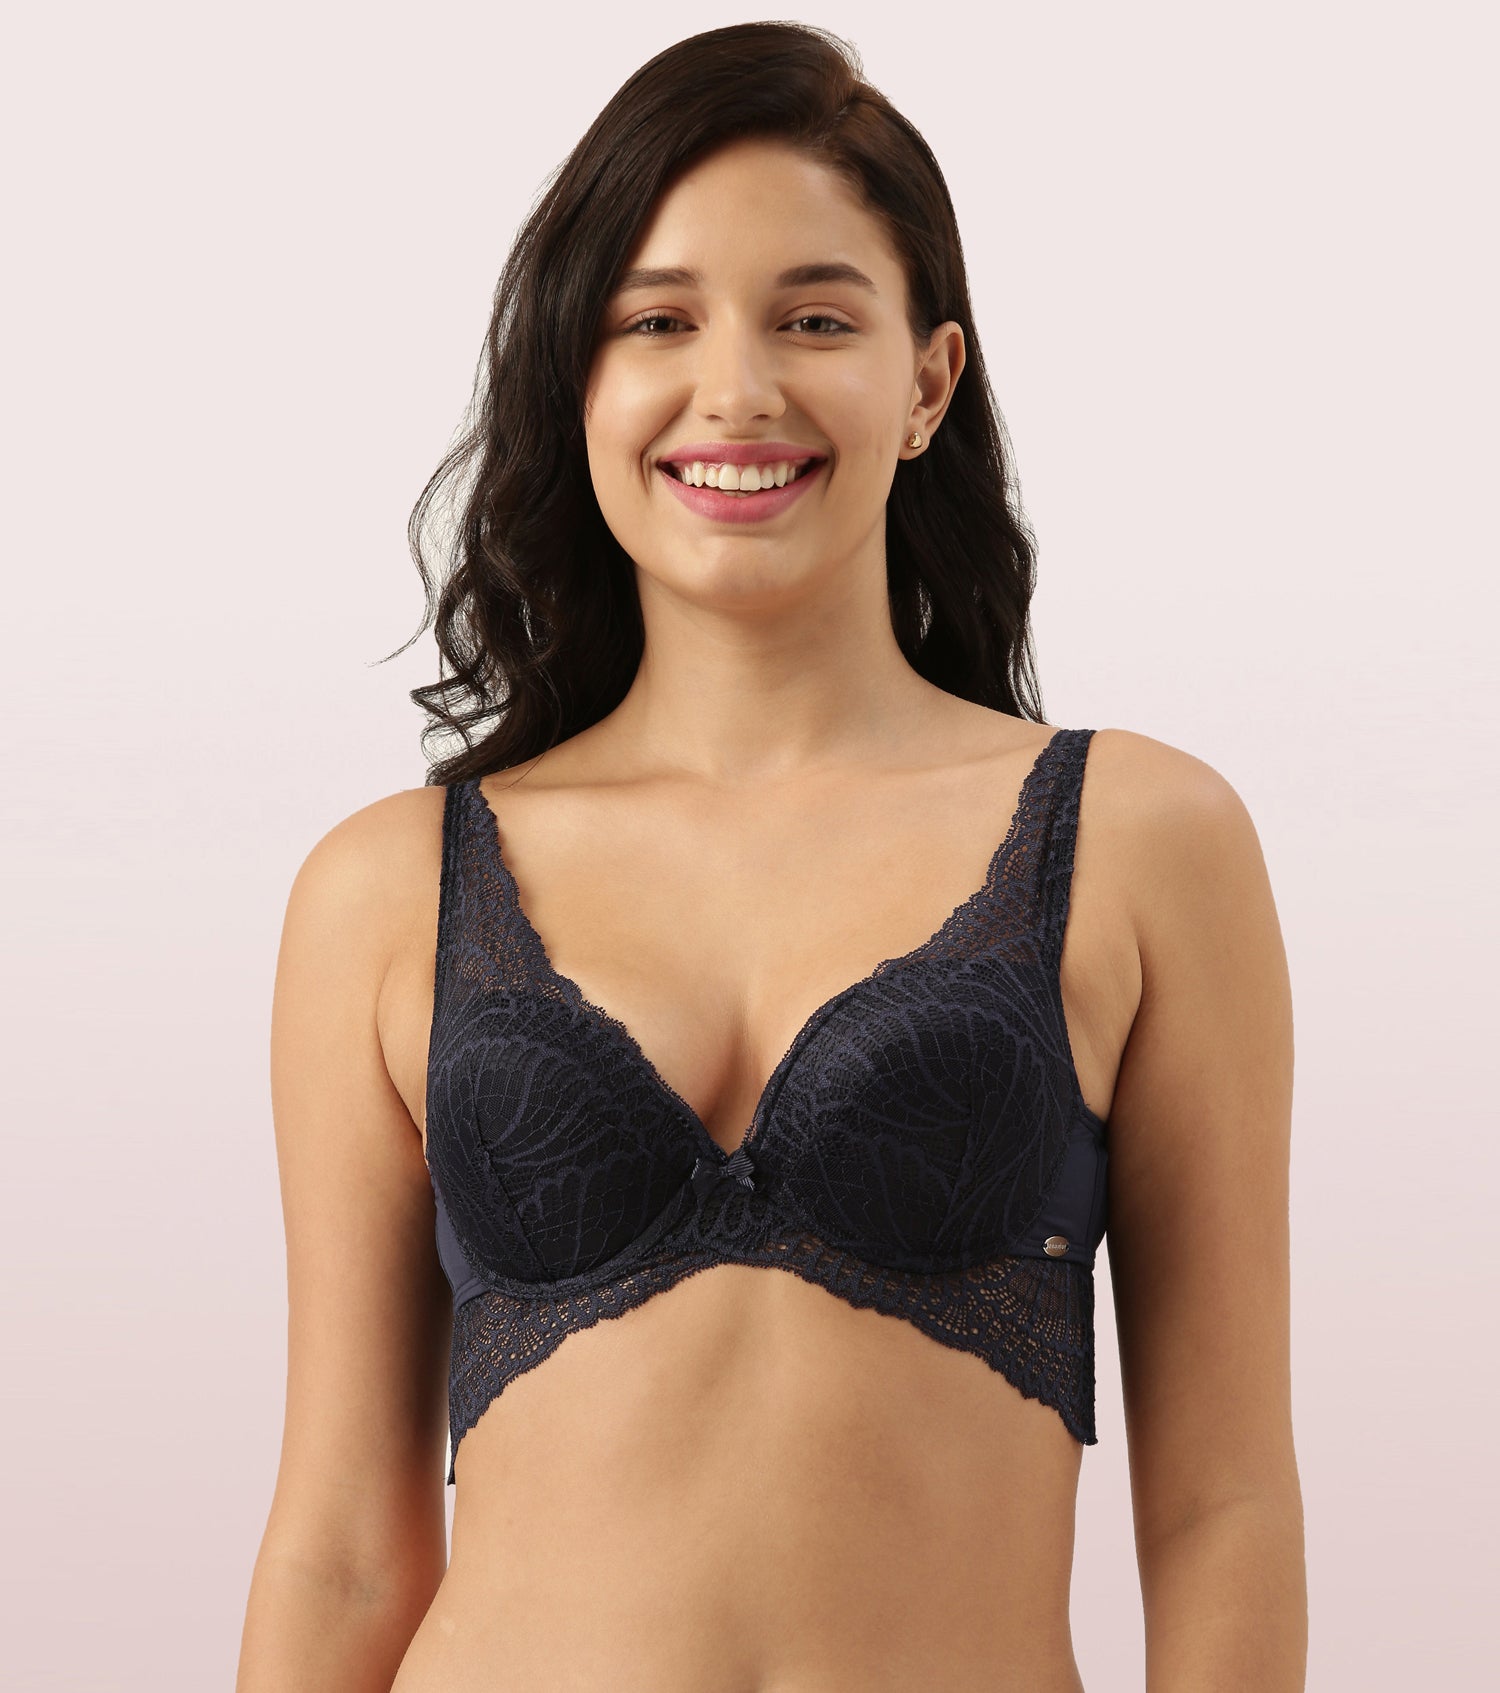 Qoo10 - Qmomo Extreme Cleavage Molded Push-up Bra and Lace Trim